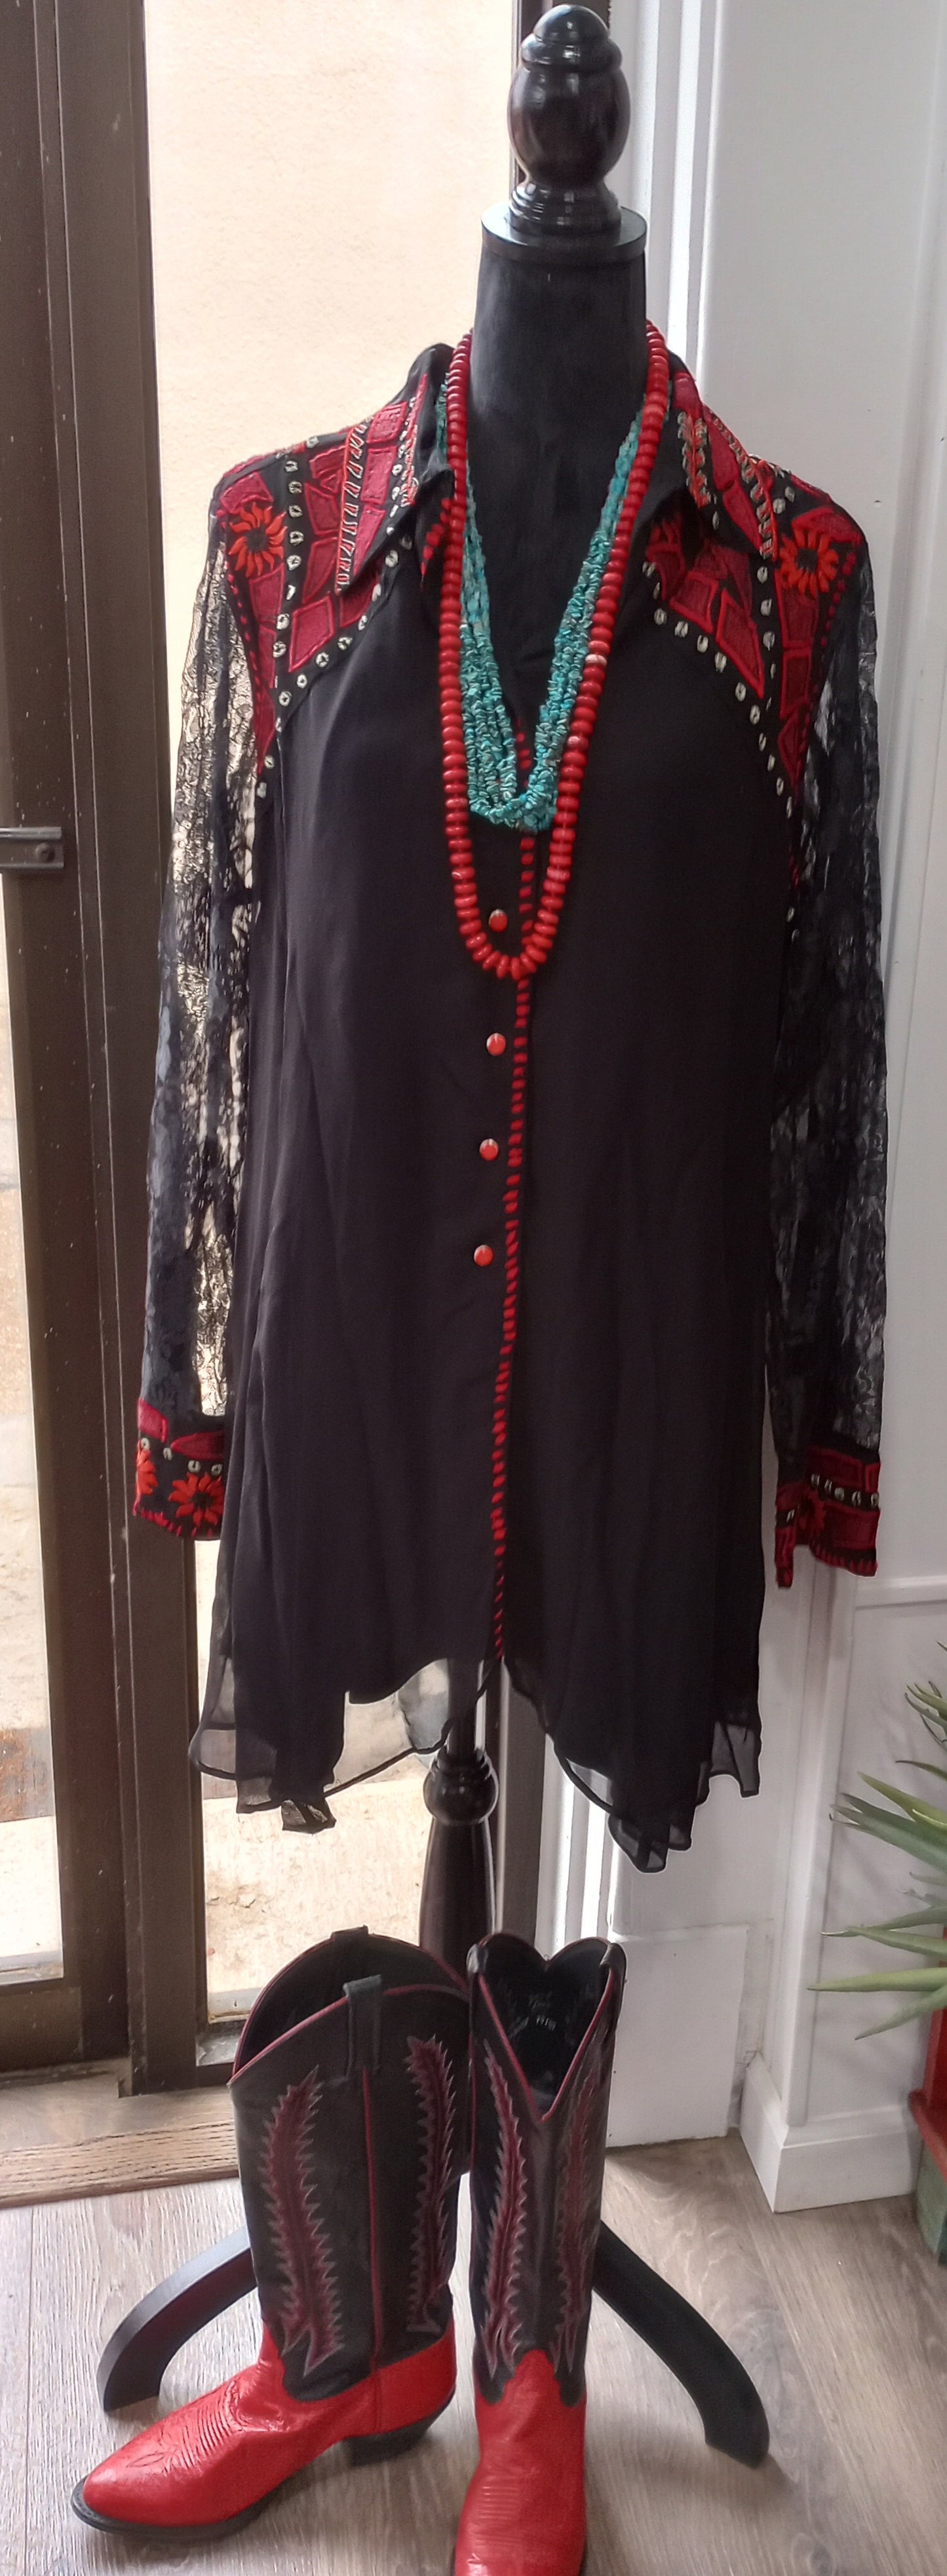 Vintage Collection Tunic/Dress